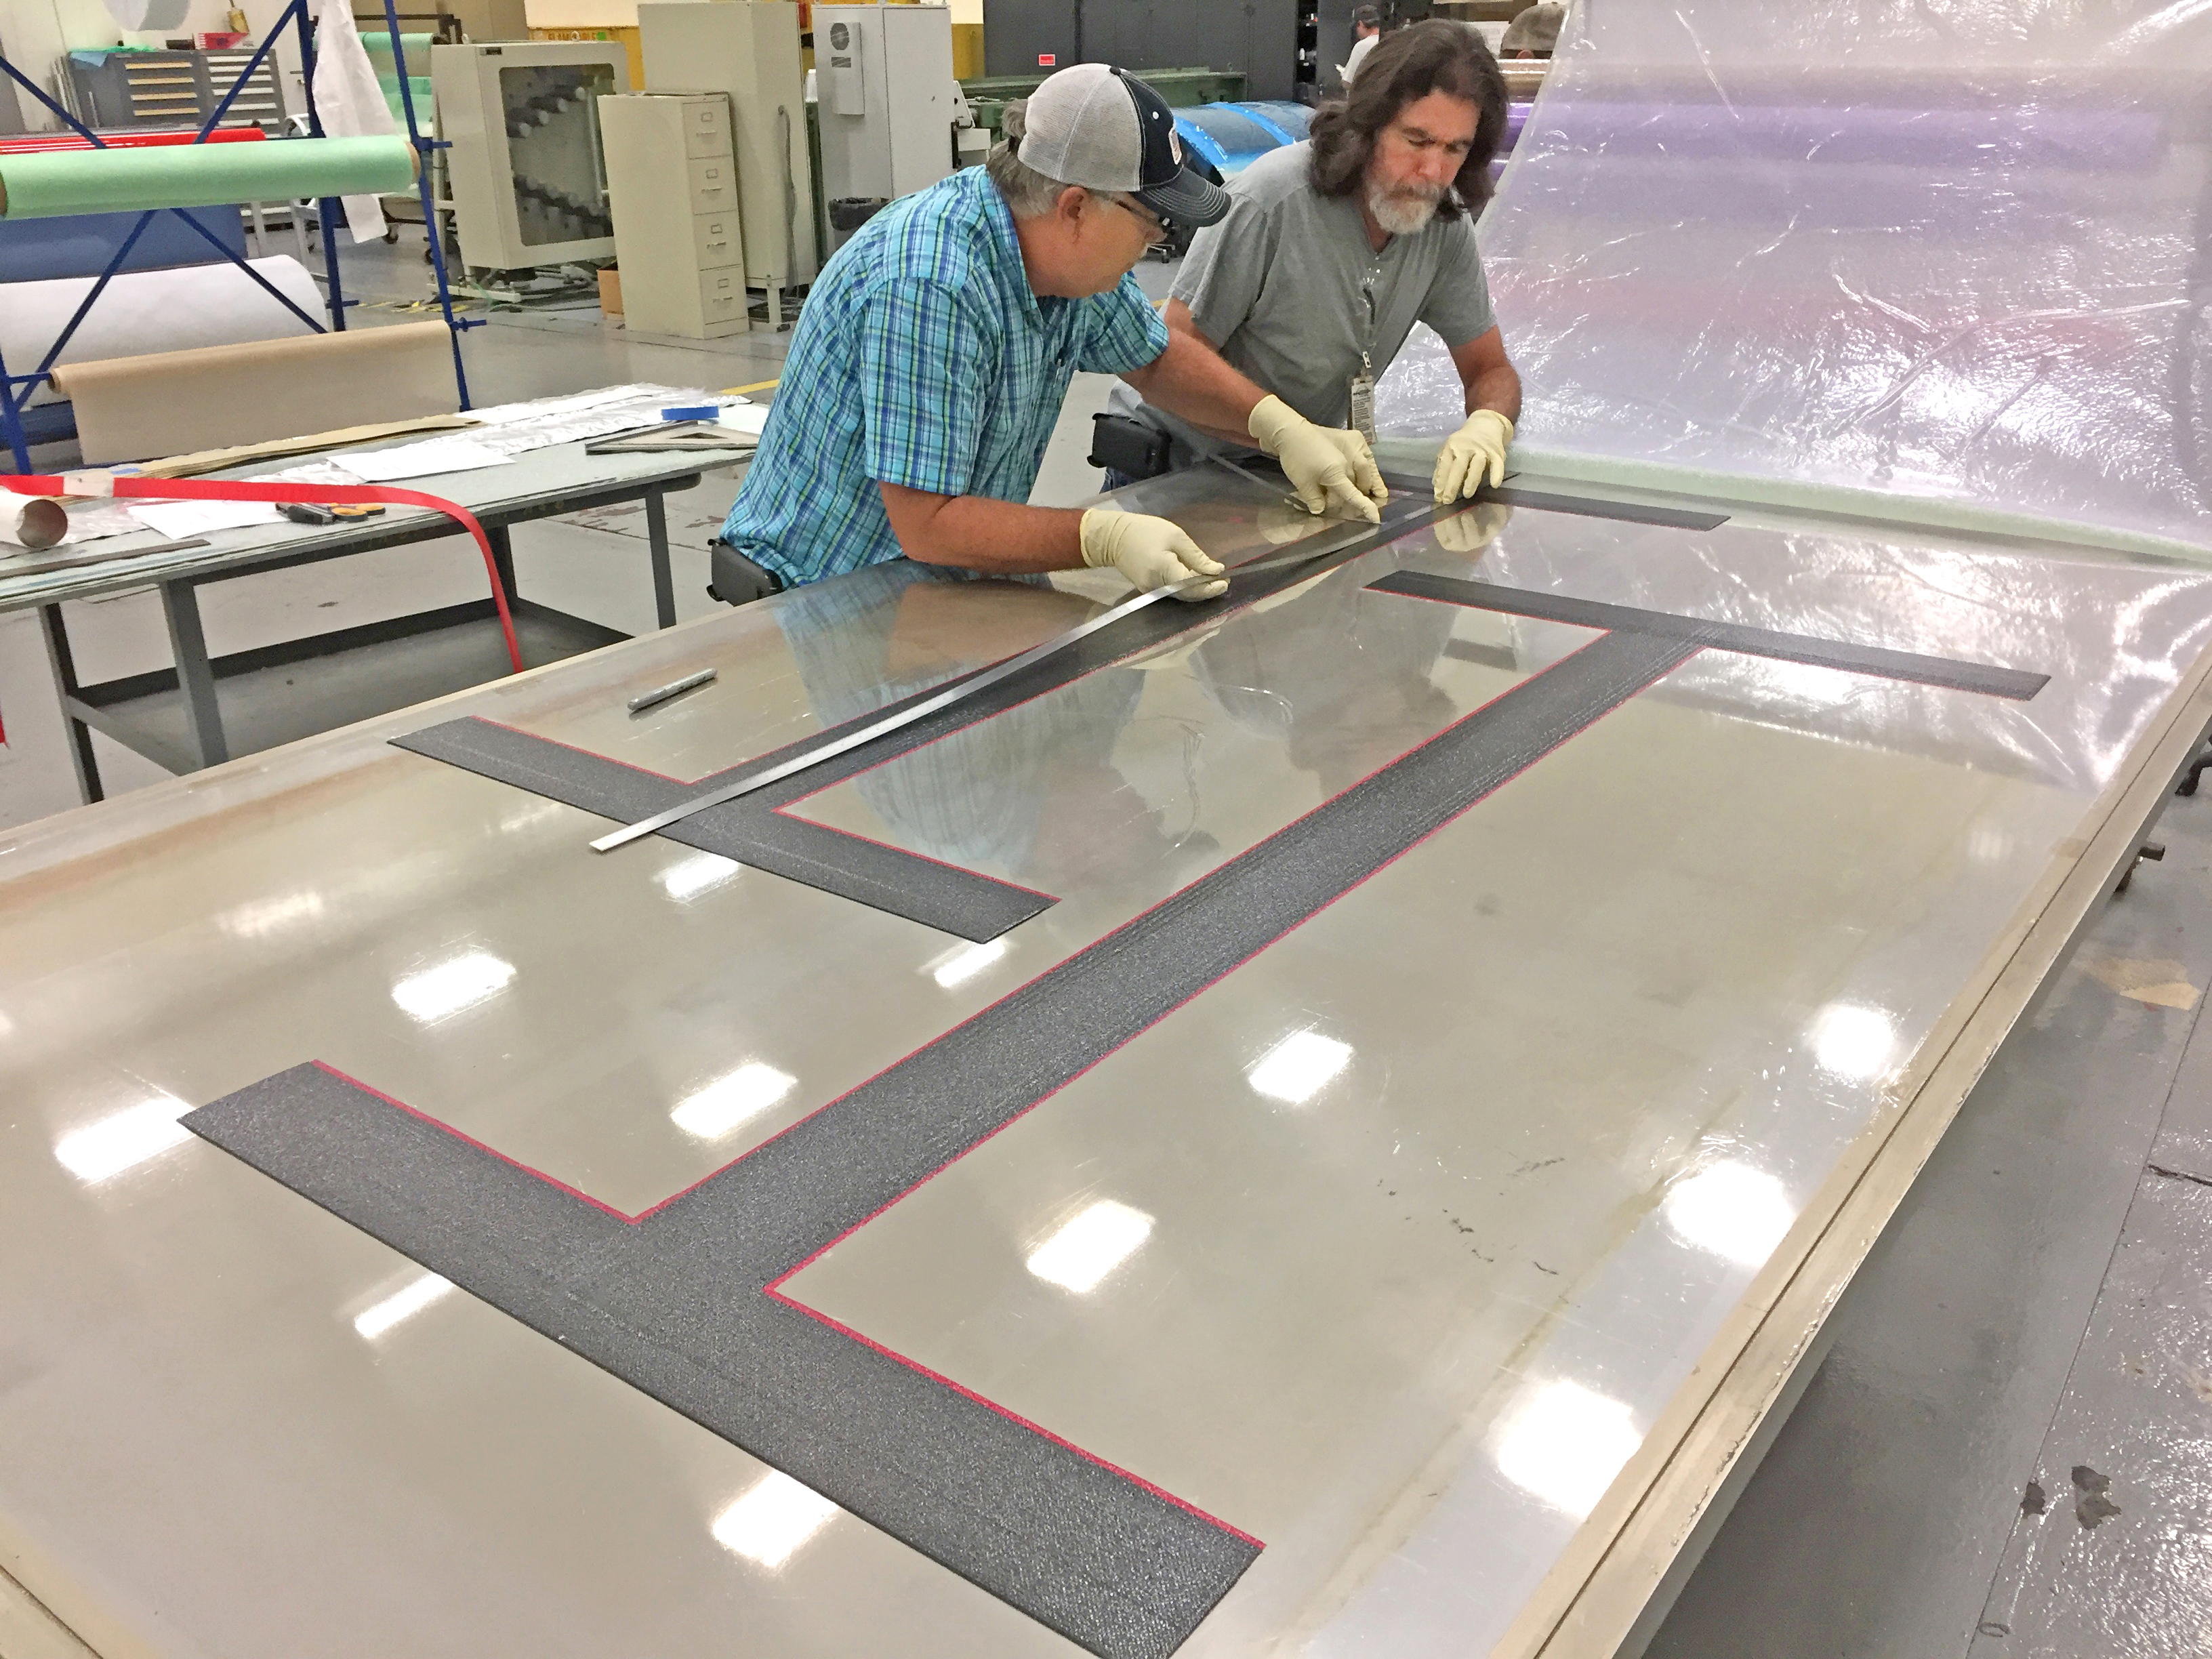 Composite Technologies for Exploration (CTE) team at NASA Marshall Space Flight Center lay up composite bonded joints on large-scale buckling panels.